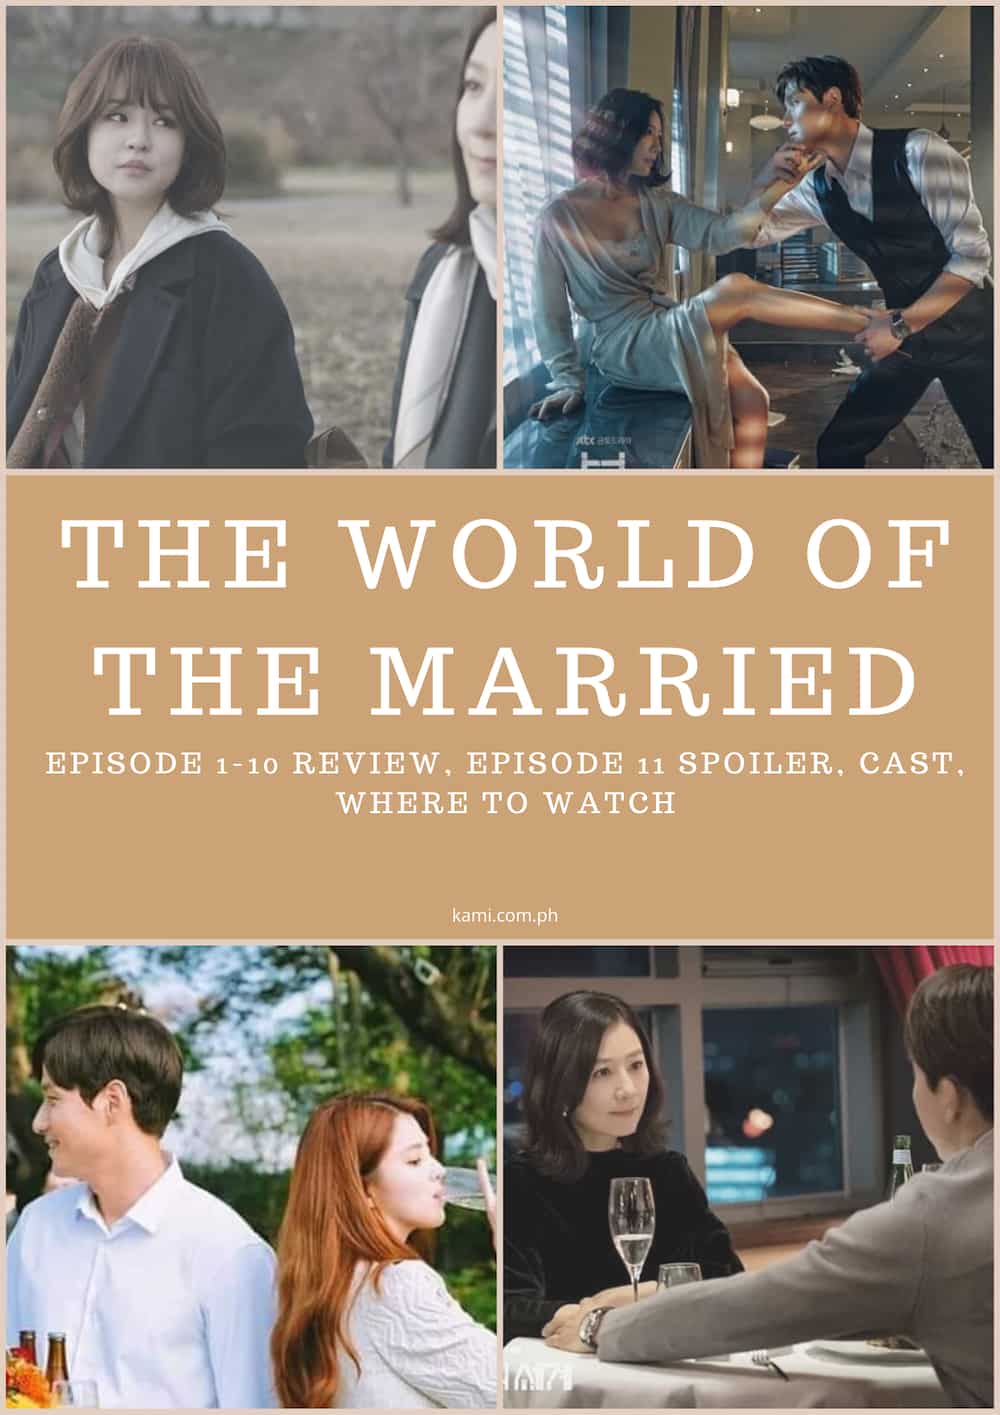 The world of the married: episode 1-10 review, episode 11 spoiler, cast, where to watch